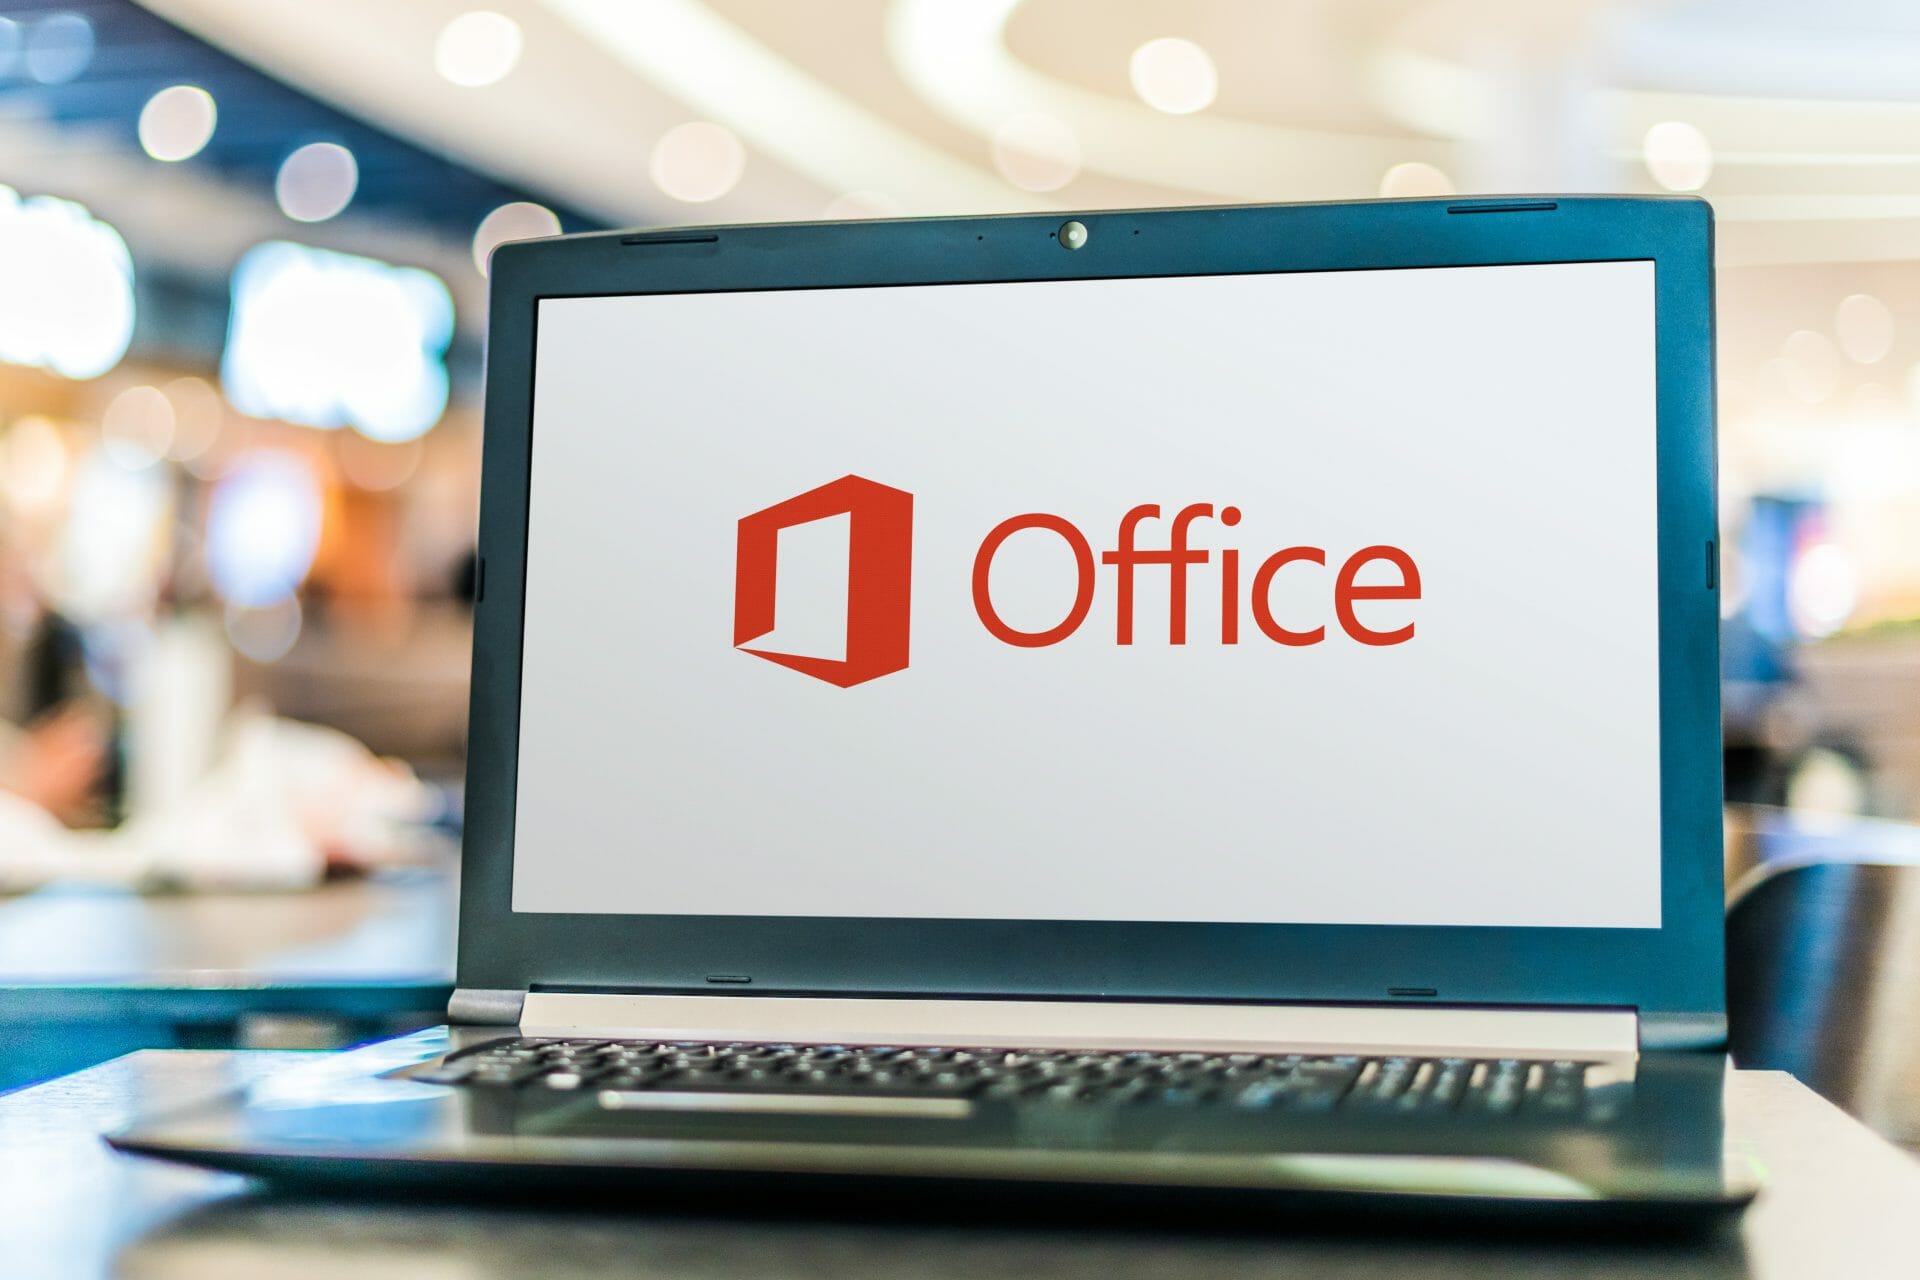 Do Lenovo Laptops Come With Microsoft Office?